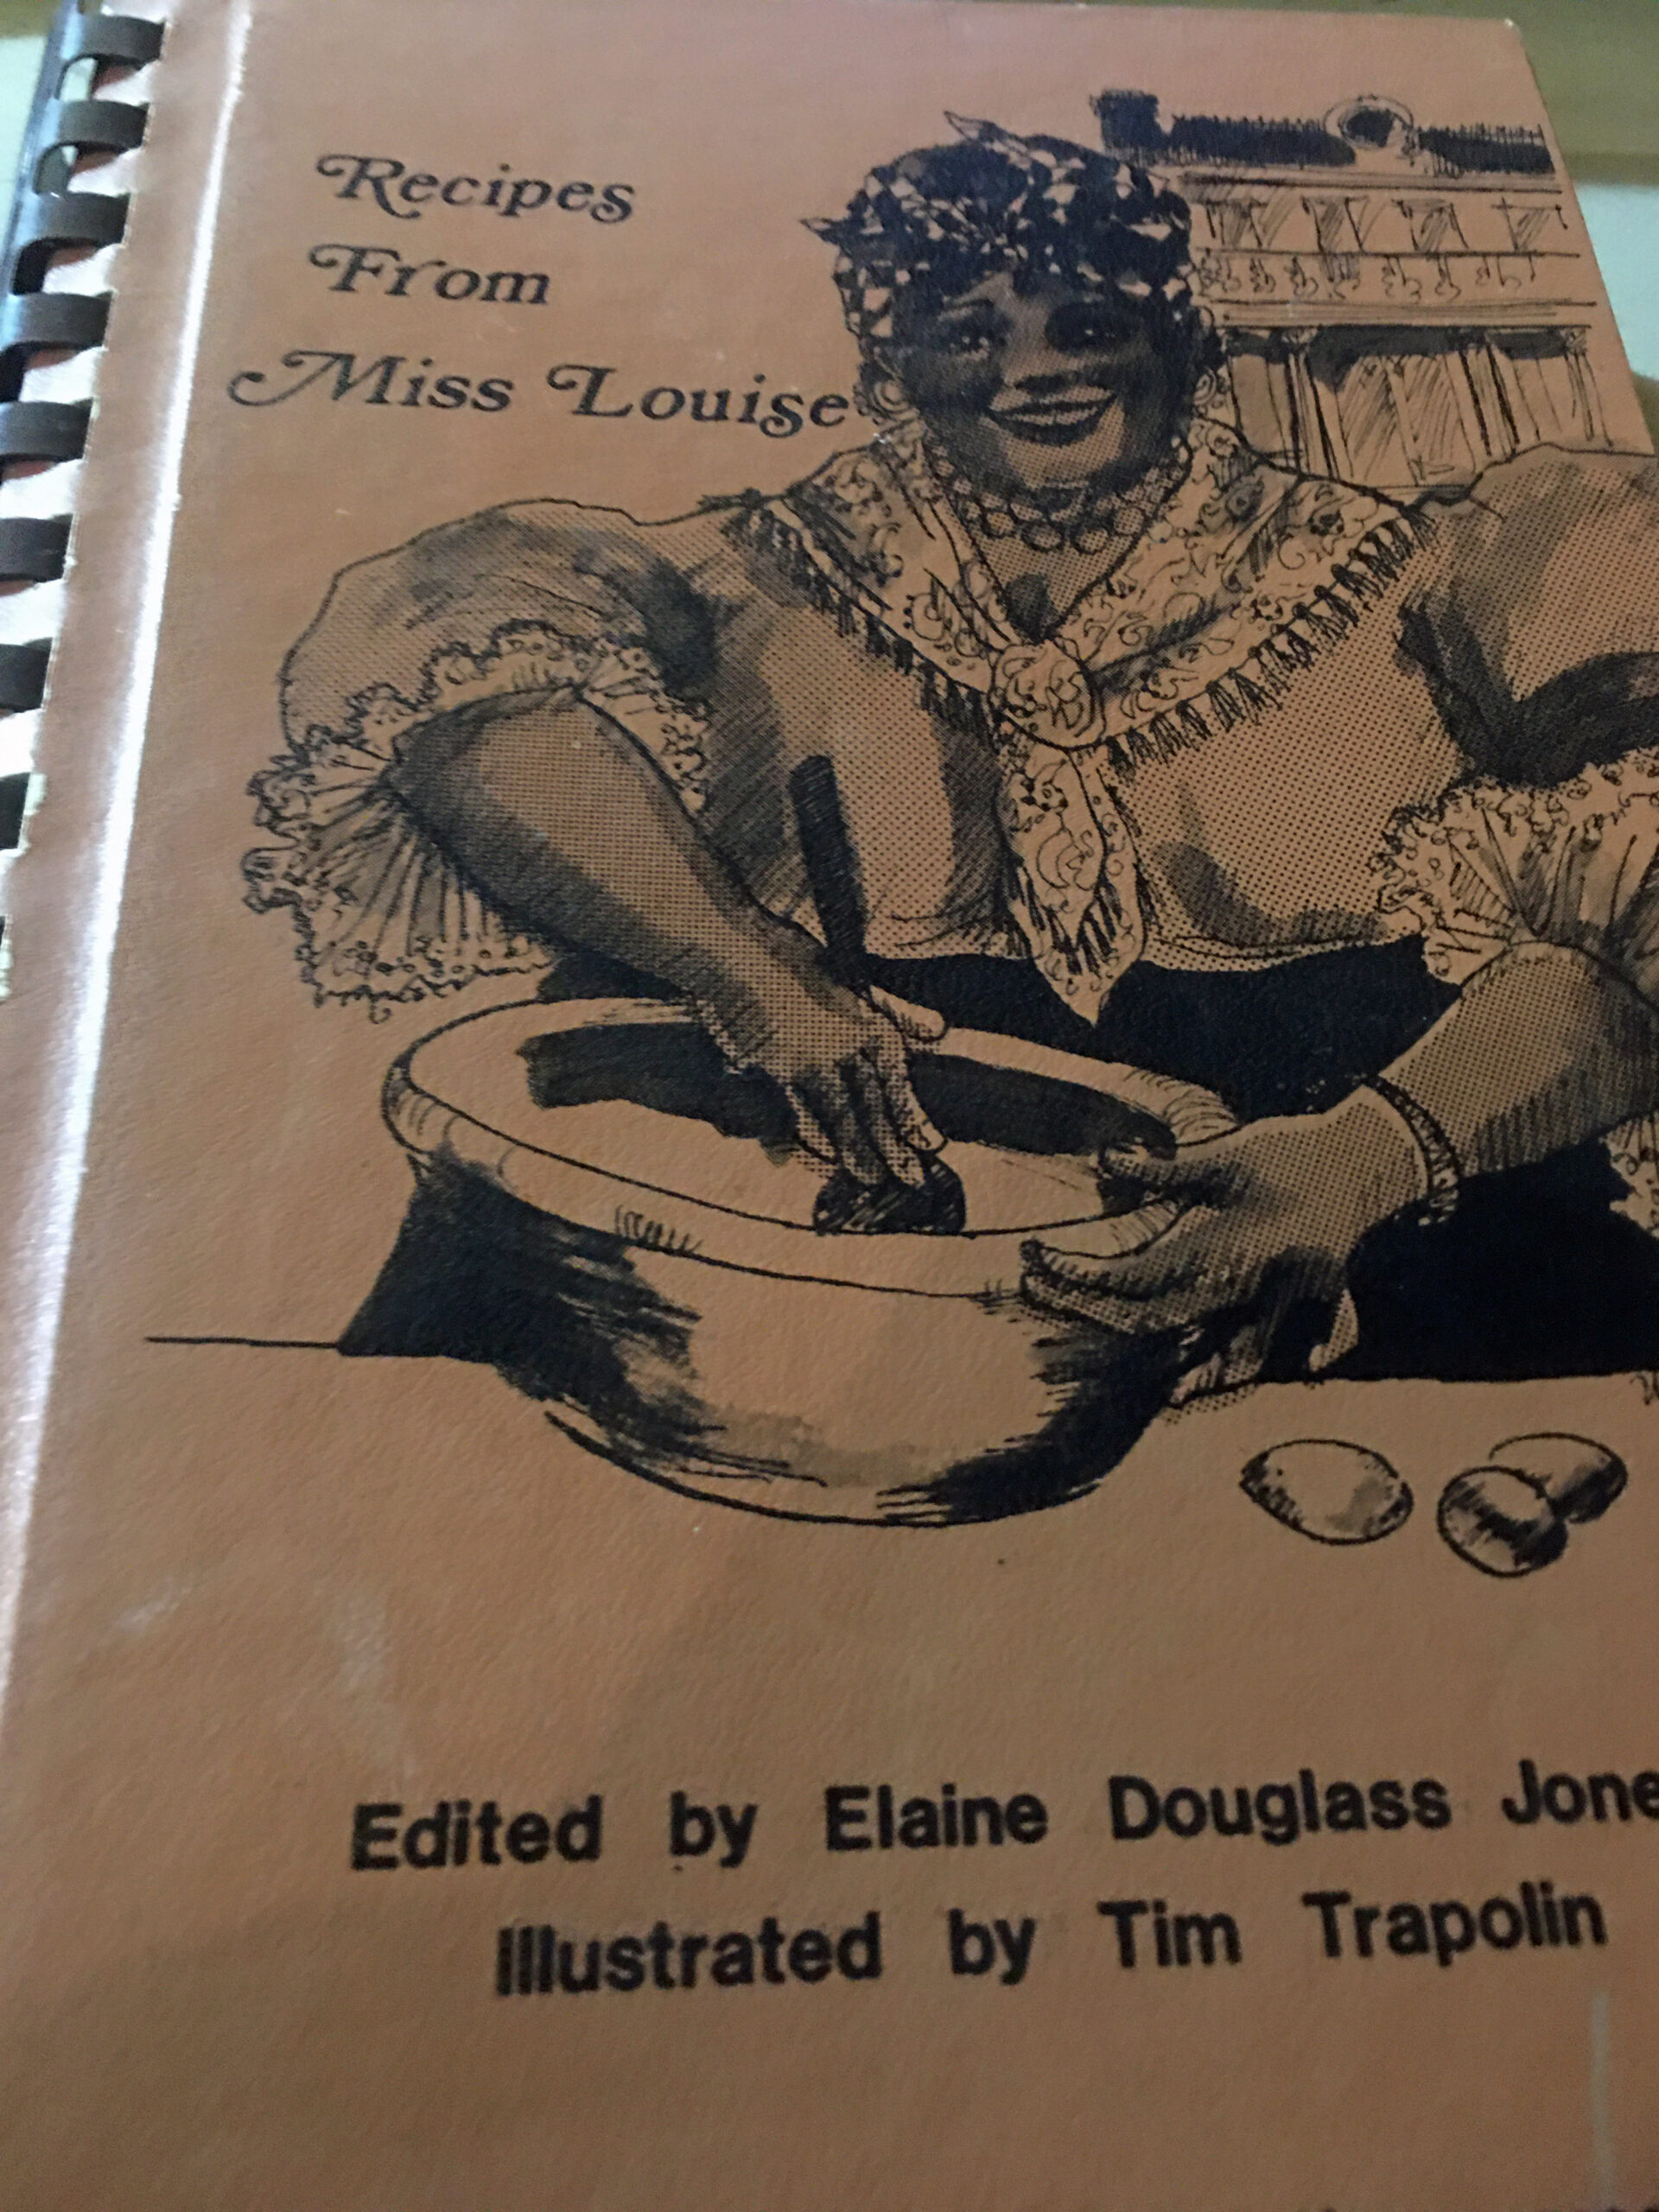 Recipes from Miss Louise, 1978, Louise S. McGehee School